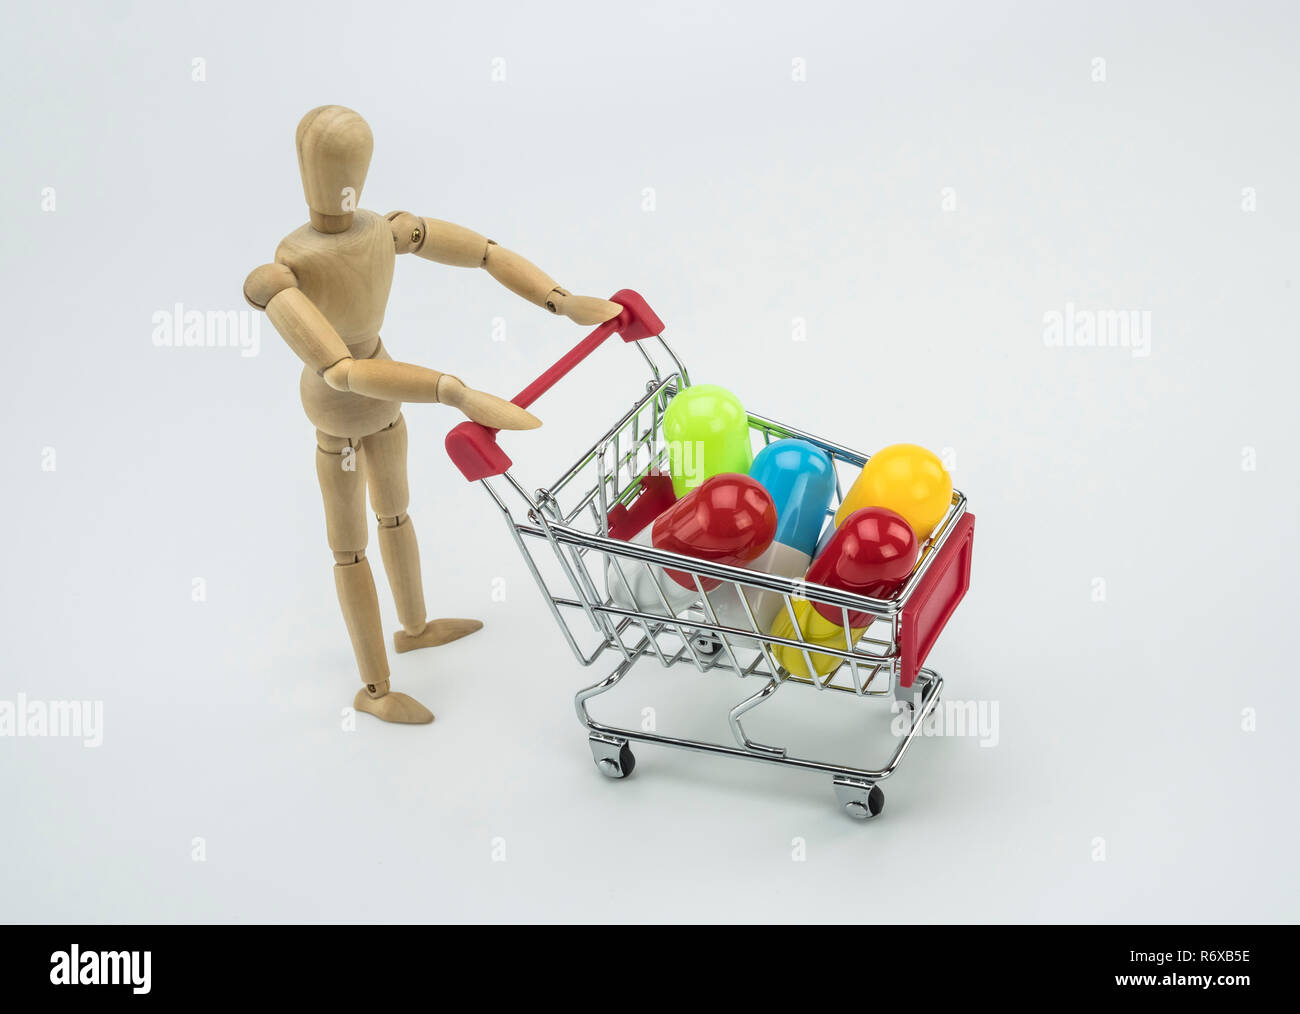 Wooden dummy carries shopping cart with pills, insulated on white background, conceptual image Stock Photo